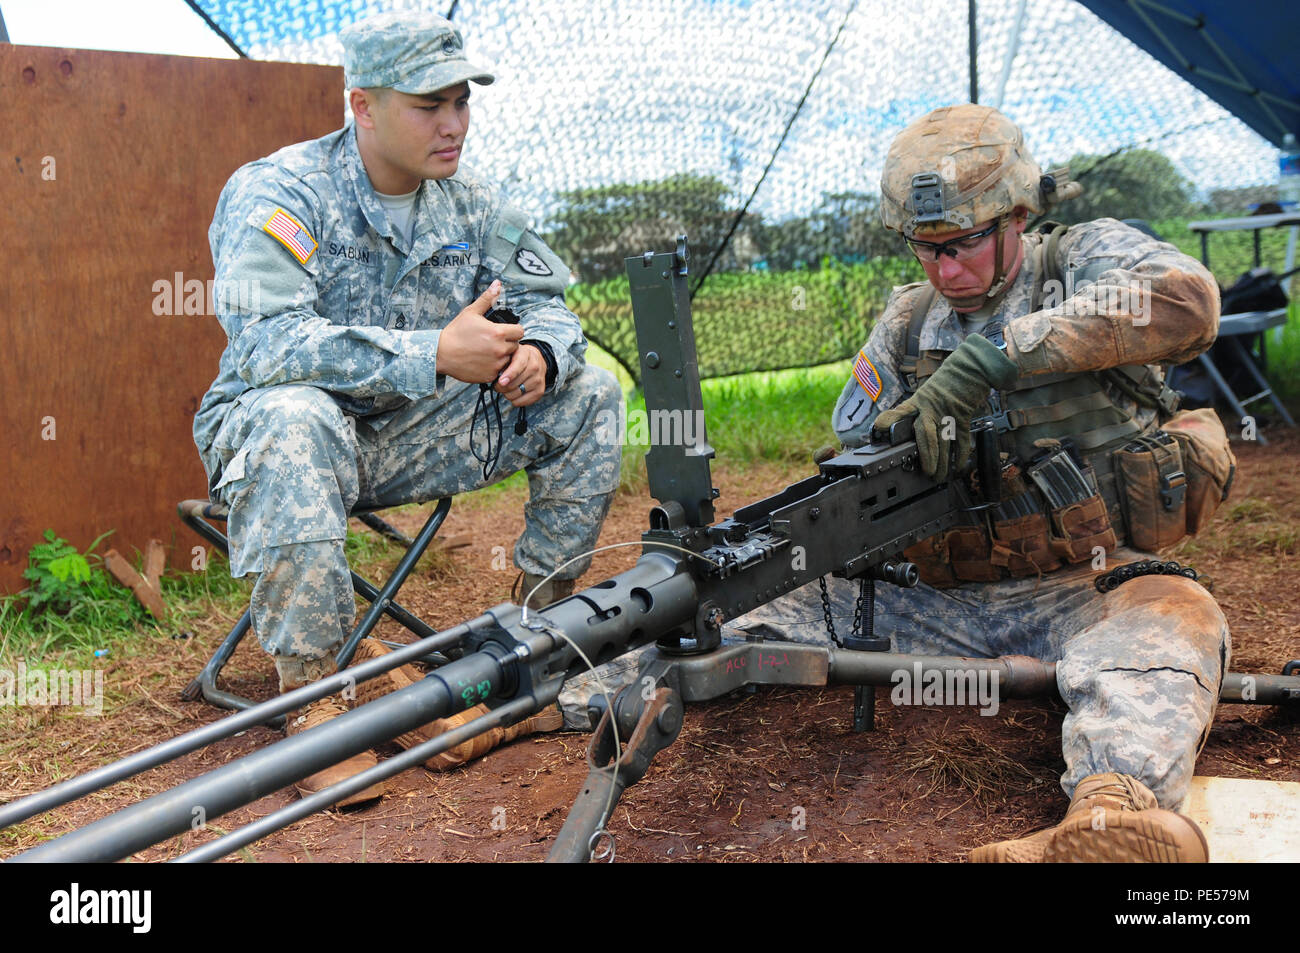 Sgt. Matthew Gallaway (right), an infantryman with Company A, 1st battalion, 27th Infantry Regiment, 2nd Stryker Brigade Combat Team, 25th Infantry Division, performs a functions check on a .50 caliber machine gun, Sept. 16, while graded by Staff Sgt. Johnathan Sablan (left), an infantryman with Company A, 1-27 IR, during the Expert Infantry Competition. Fifty Soldiers who competed in this iteration of the EIB competition earned the coveted badge. (U.S. Army photo by Sgt. Ian Ives, 2nd Stryker Brigade Combat Team Public Affairs/Released). Stock Photo